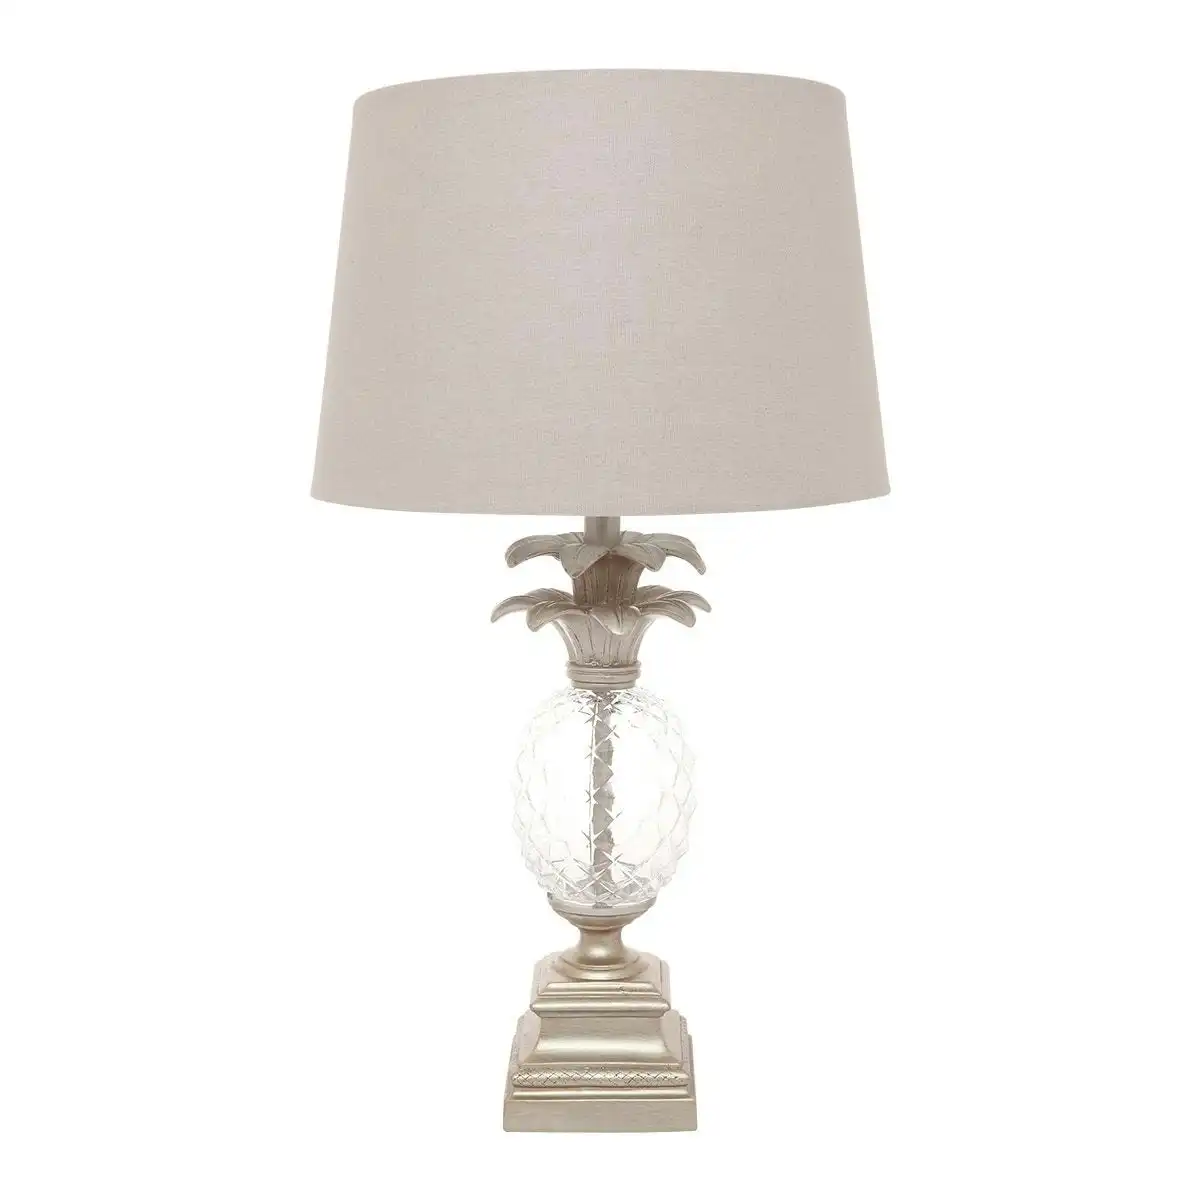 Langley Table Lamp - Antique Silver